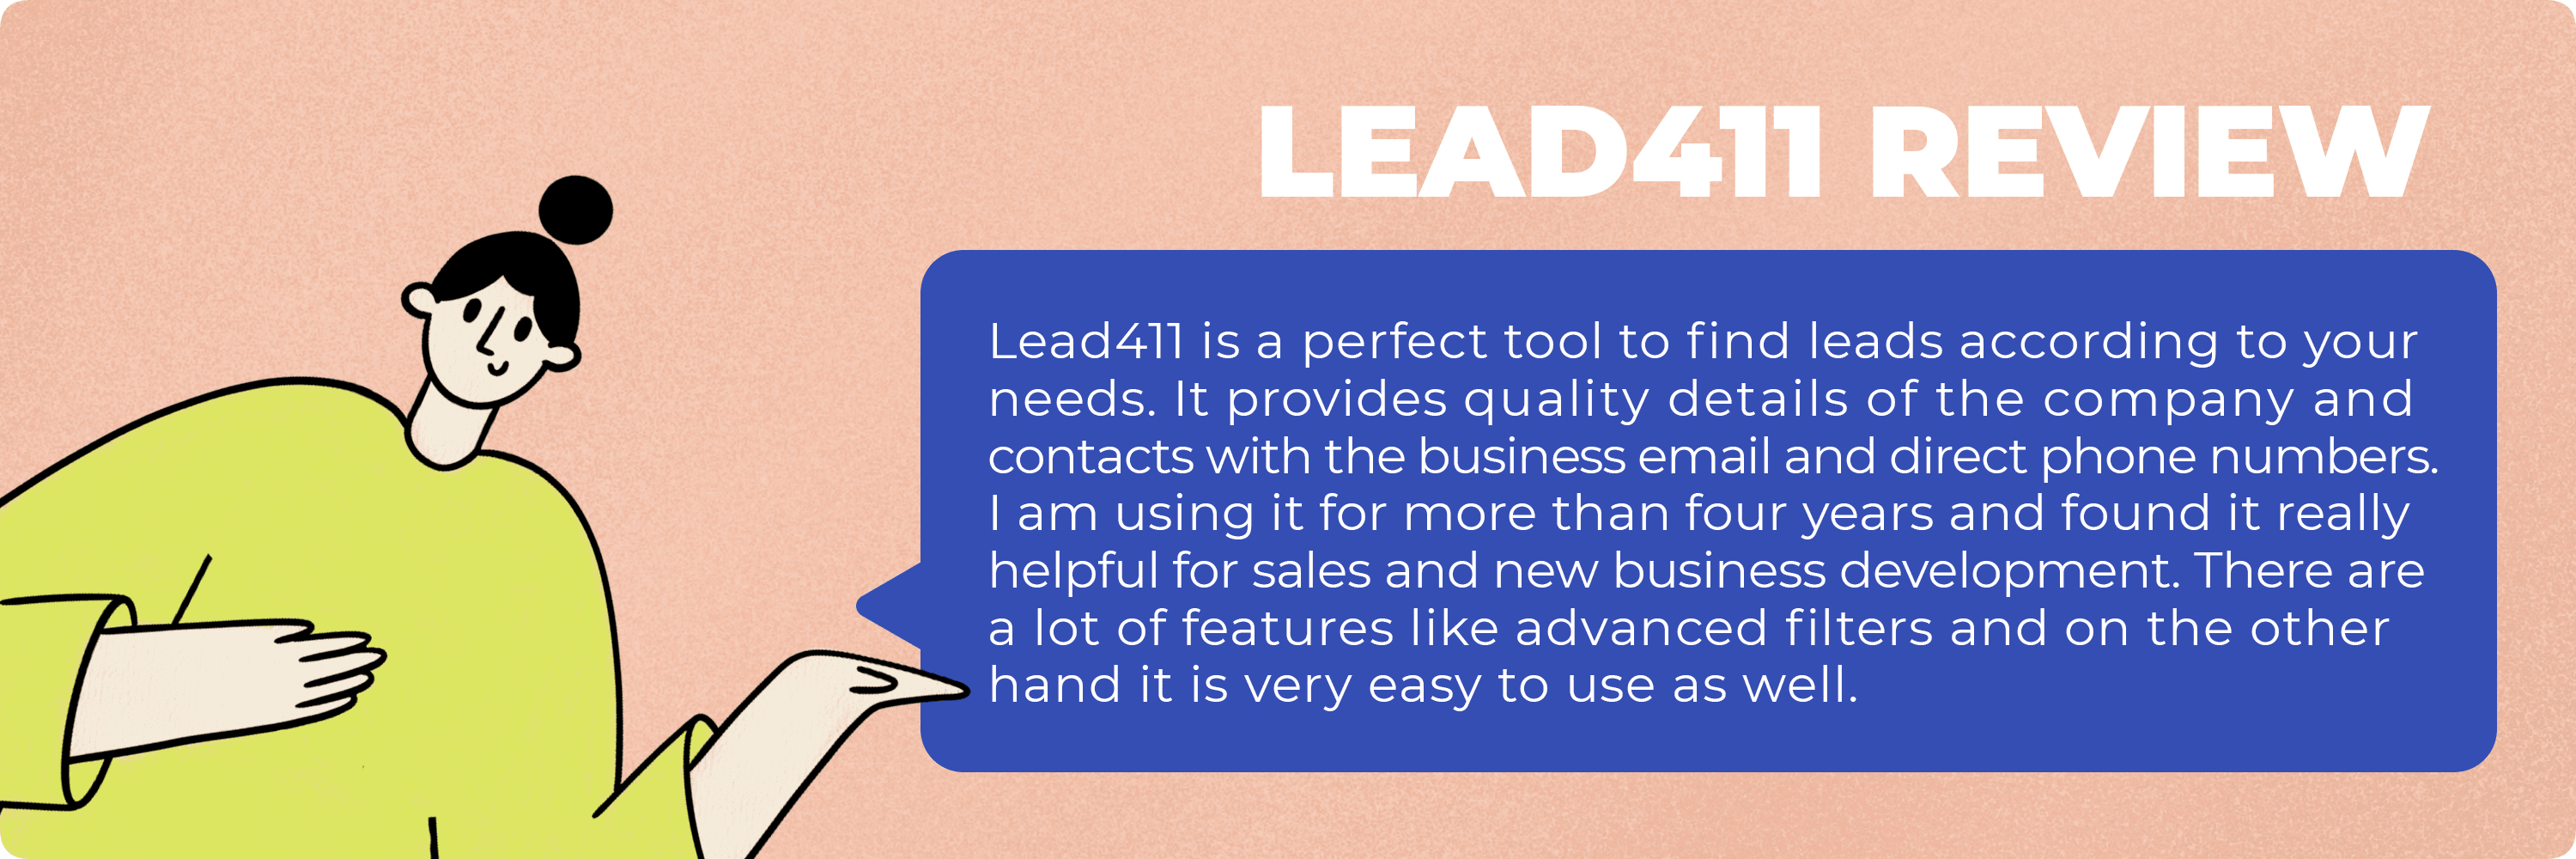 lead411 review